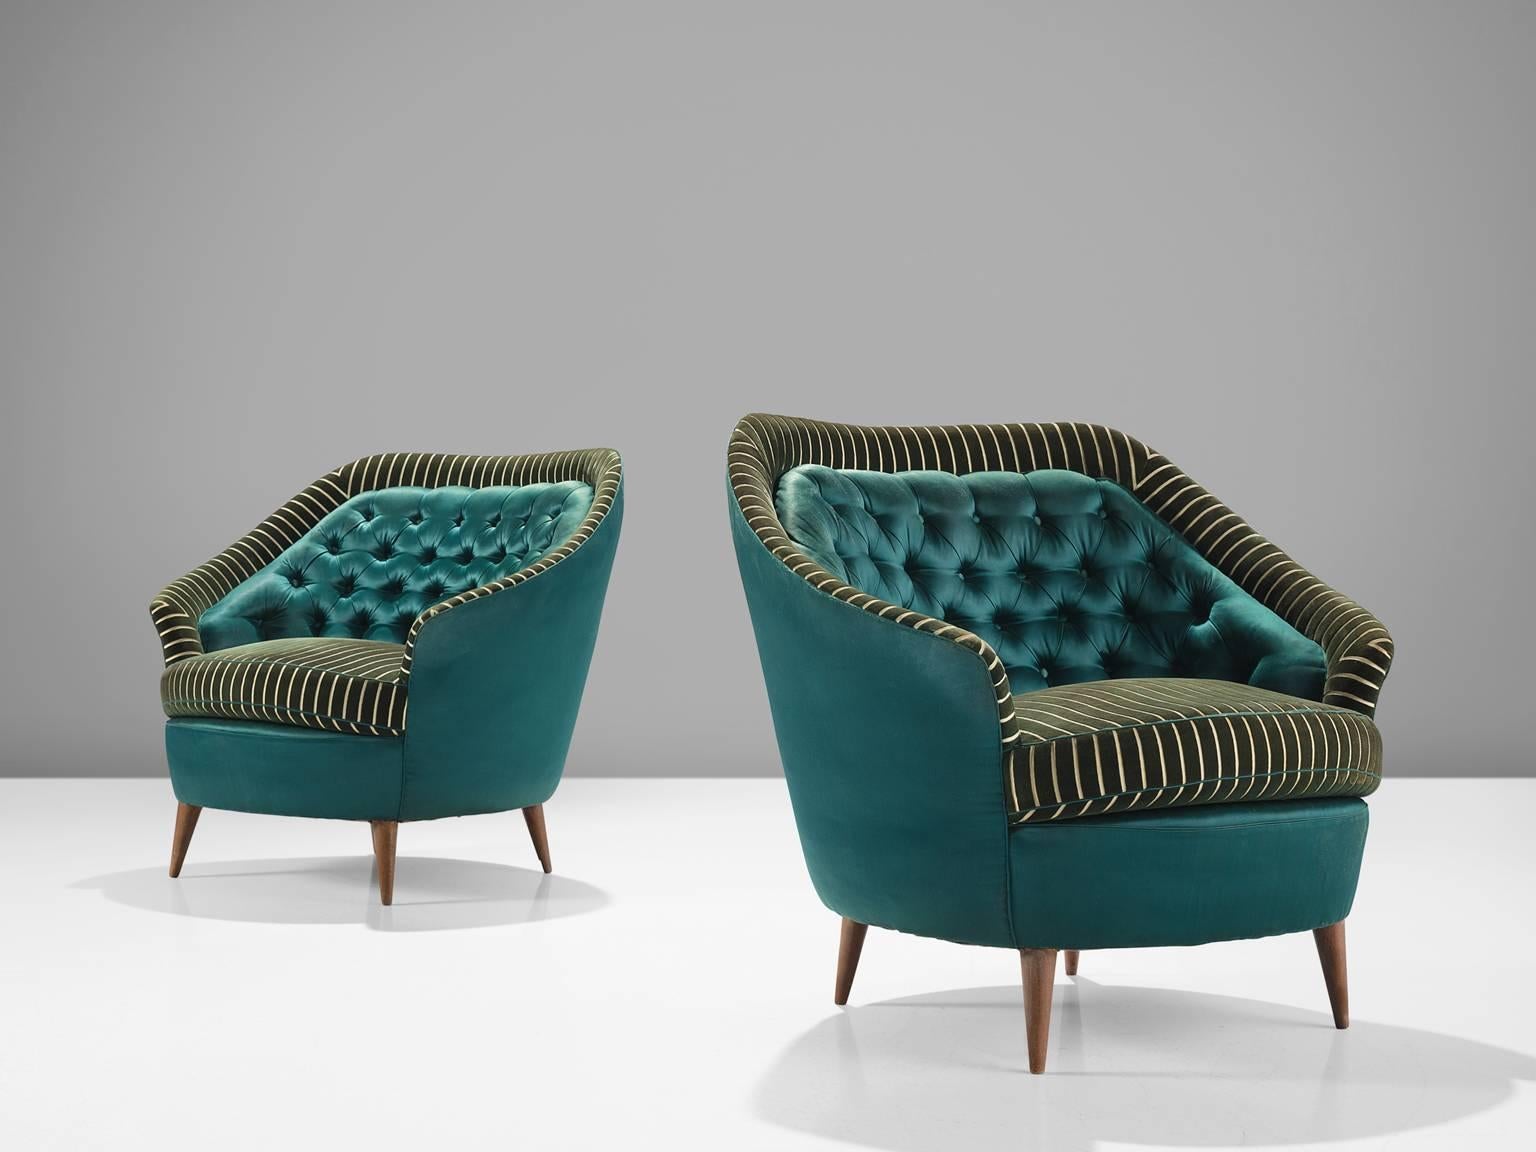 Italian sofa, armchairs, green striped velvet and turquoise satin like fabric, wood, Italy, 1950s.

This set of armchairs is an iconic example of Italian design from the 1950s. The chairs are on the one hand simplistic, with elegant, subtle lines in